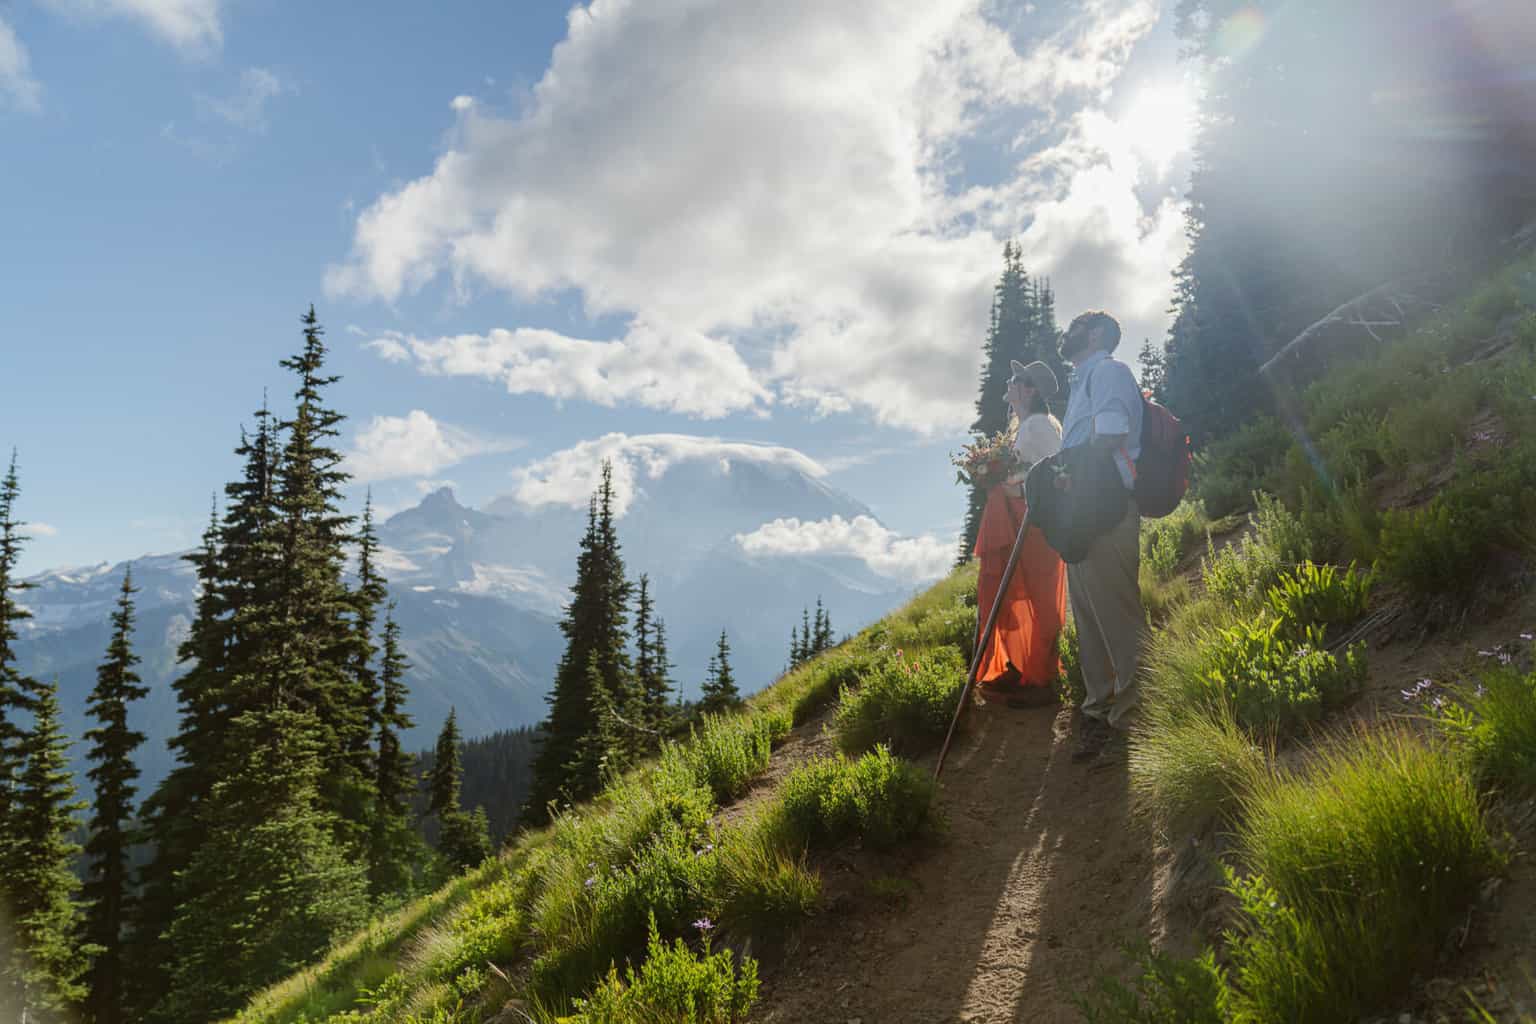 Couple enjoys the view of Mount Rainier as they hike to their vow exchange location with outshined photography